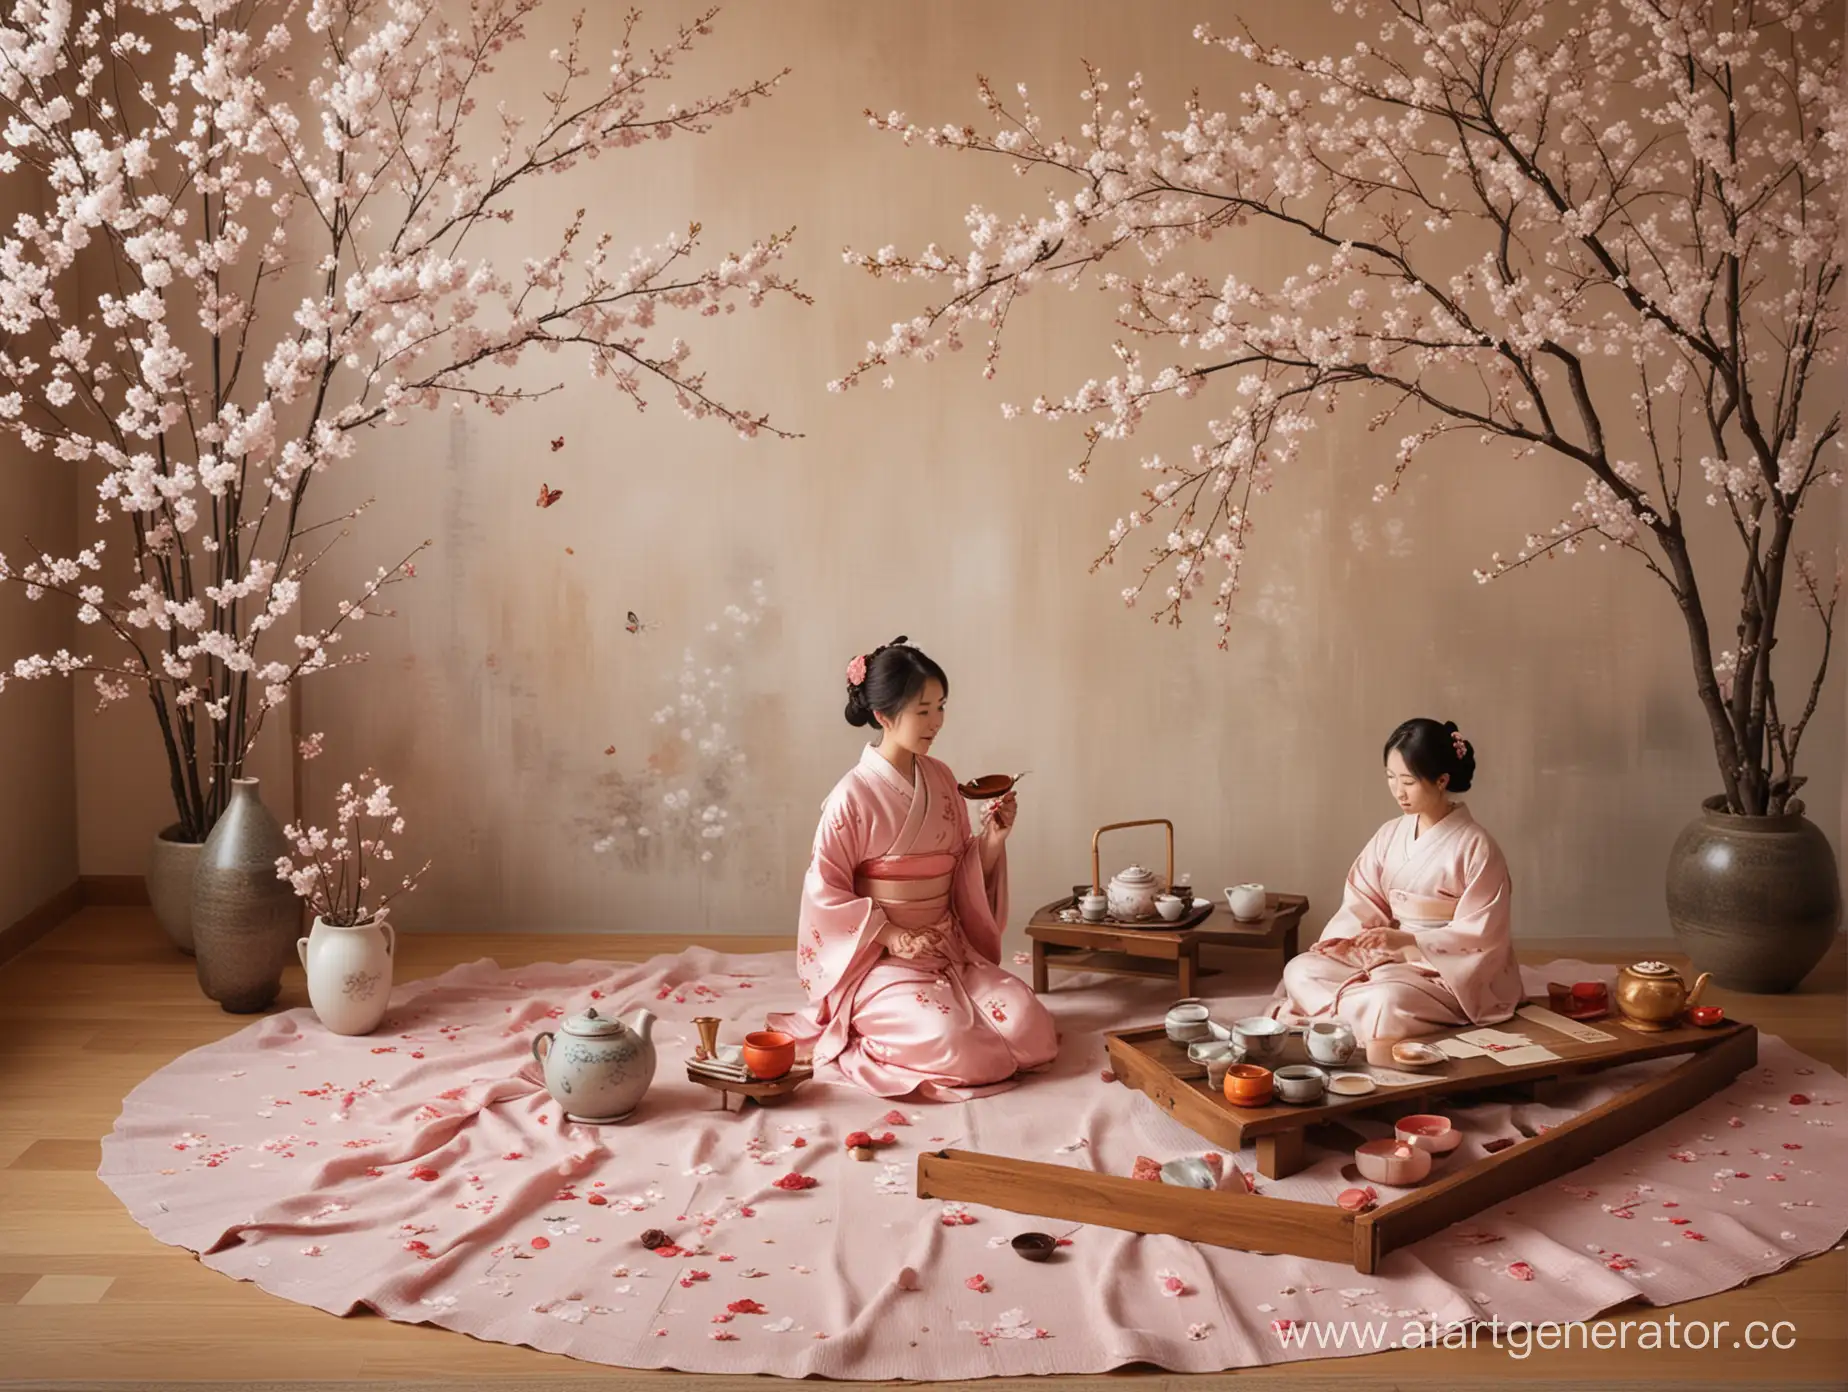 The painting can depict a Chinese tea ceremony in spring, where two people, surrounded by symbols of love and harmony, share a cup of tea against a background of cherry blossoms. The glucophone, an instrument symbolizing music and spiritual harmony, can be depicted next to them, adding an atmosphere of calm and balance.
Reiki elements symbolizing energy purification and healing can be woven into the decor of the room where the ceremony takes place. And symbols of love, such as hearts or butterflies, can decorate a corner of sakura and create an atmosphere of tenderness and mutual understanding.
Such a picture will reflect the beauty and tranquility of the moment of the tea ceremony, filled with love, harmony, music, energy purity and spring mood.